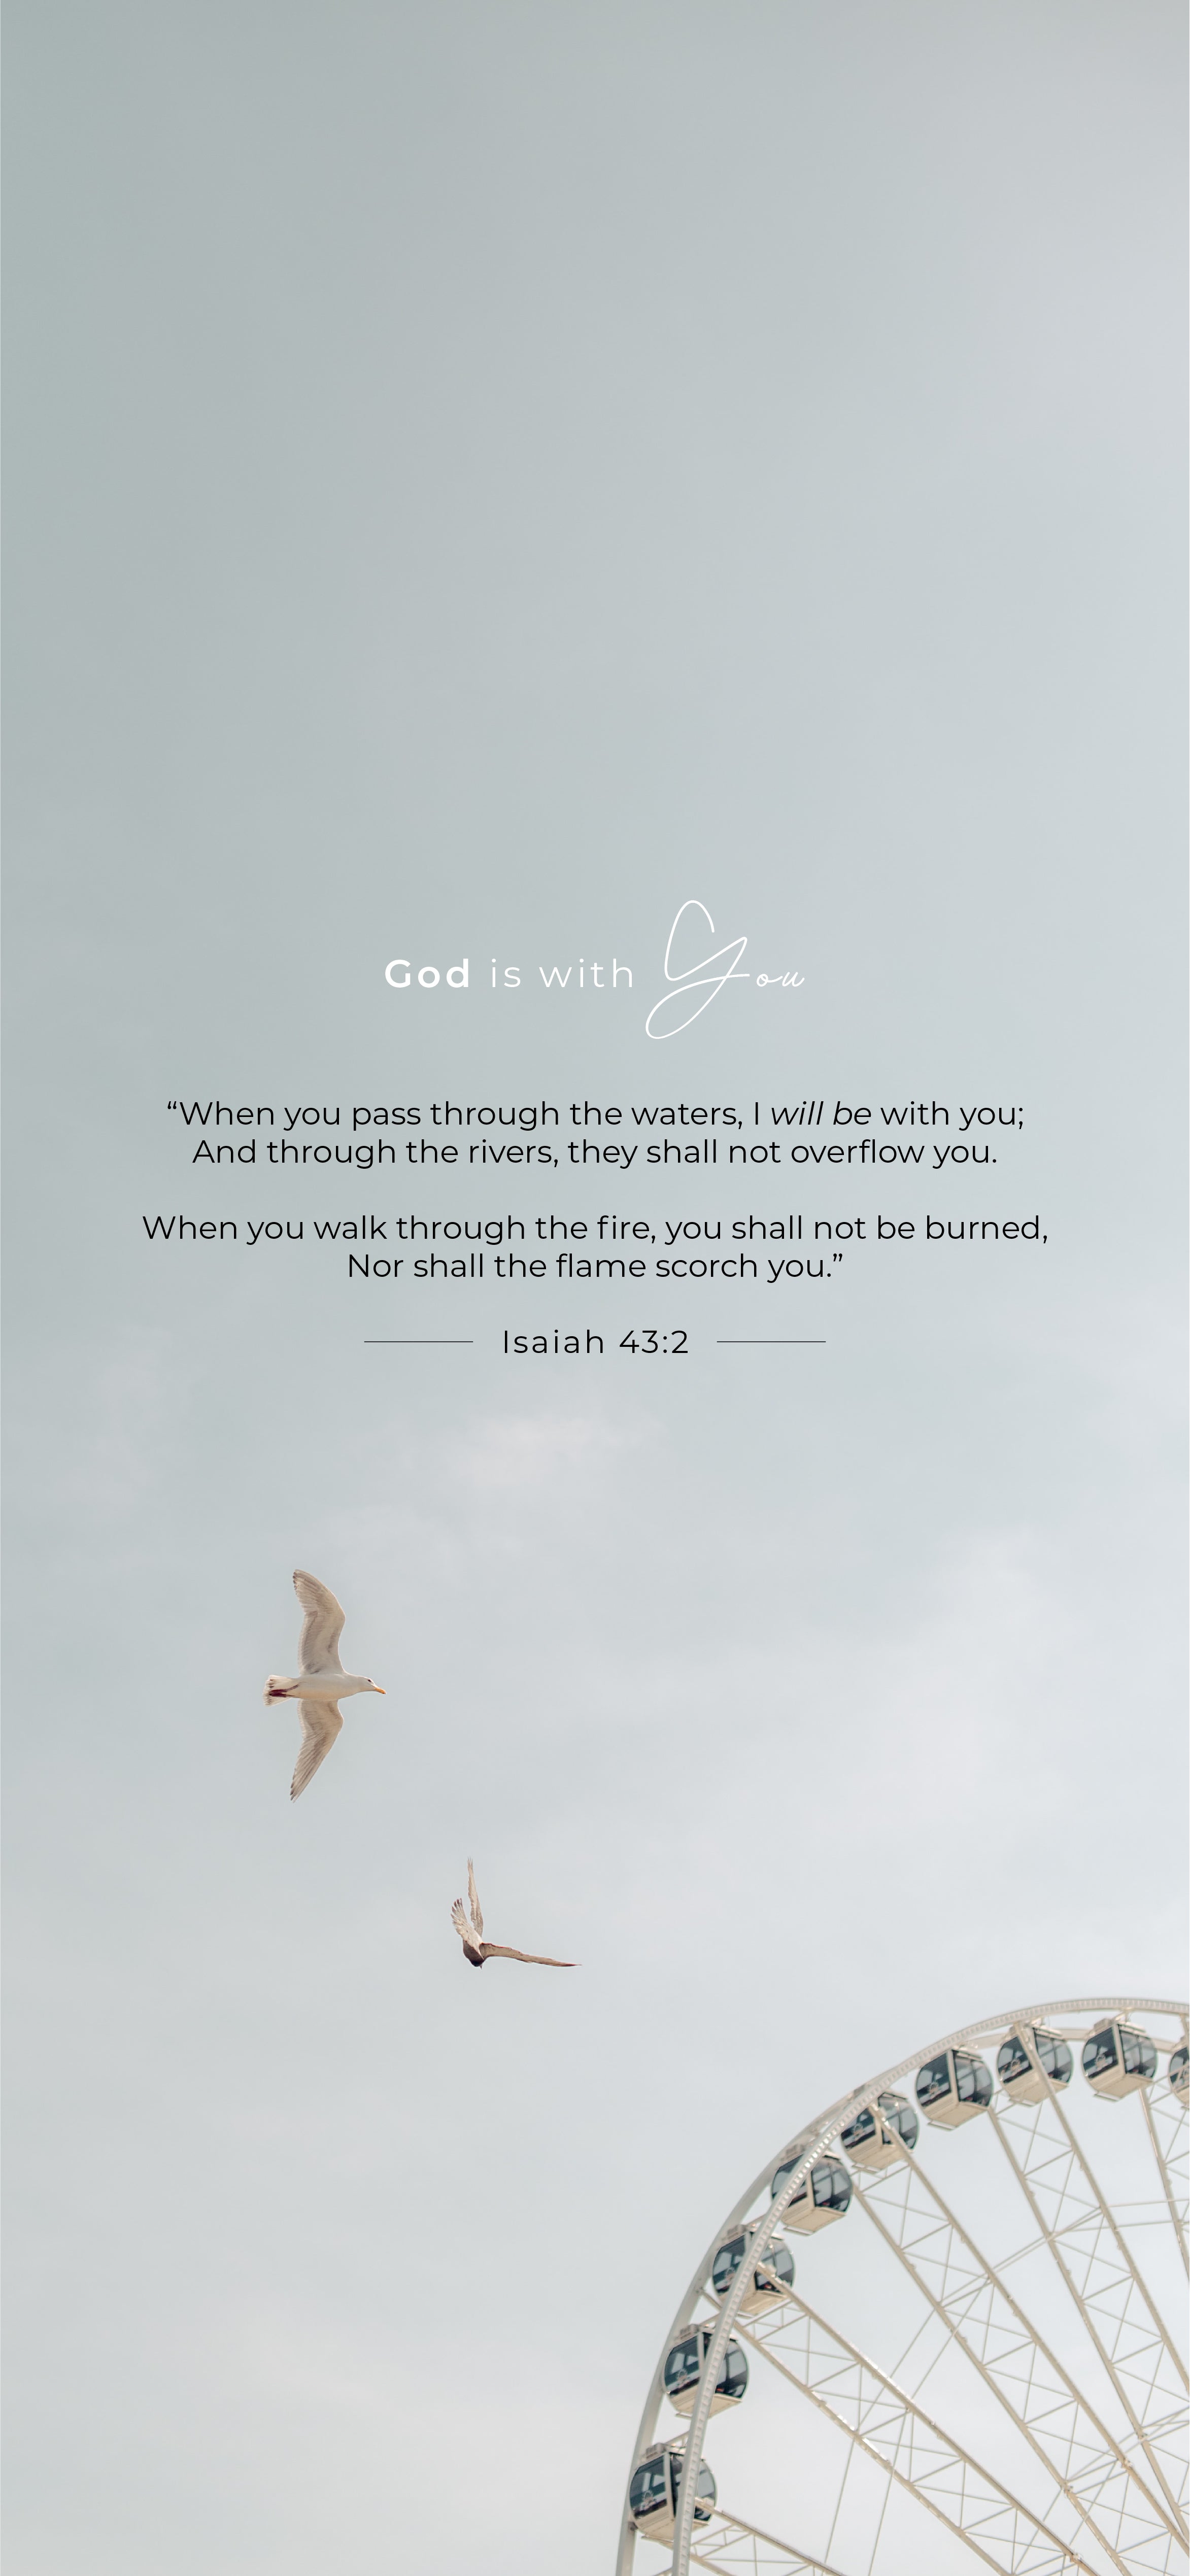 Free Christian Wallpaper: Christian Quote, Bible Verse